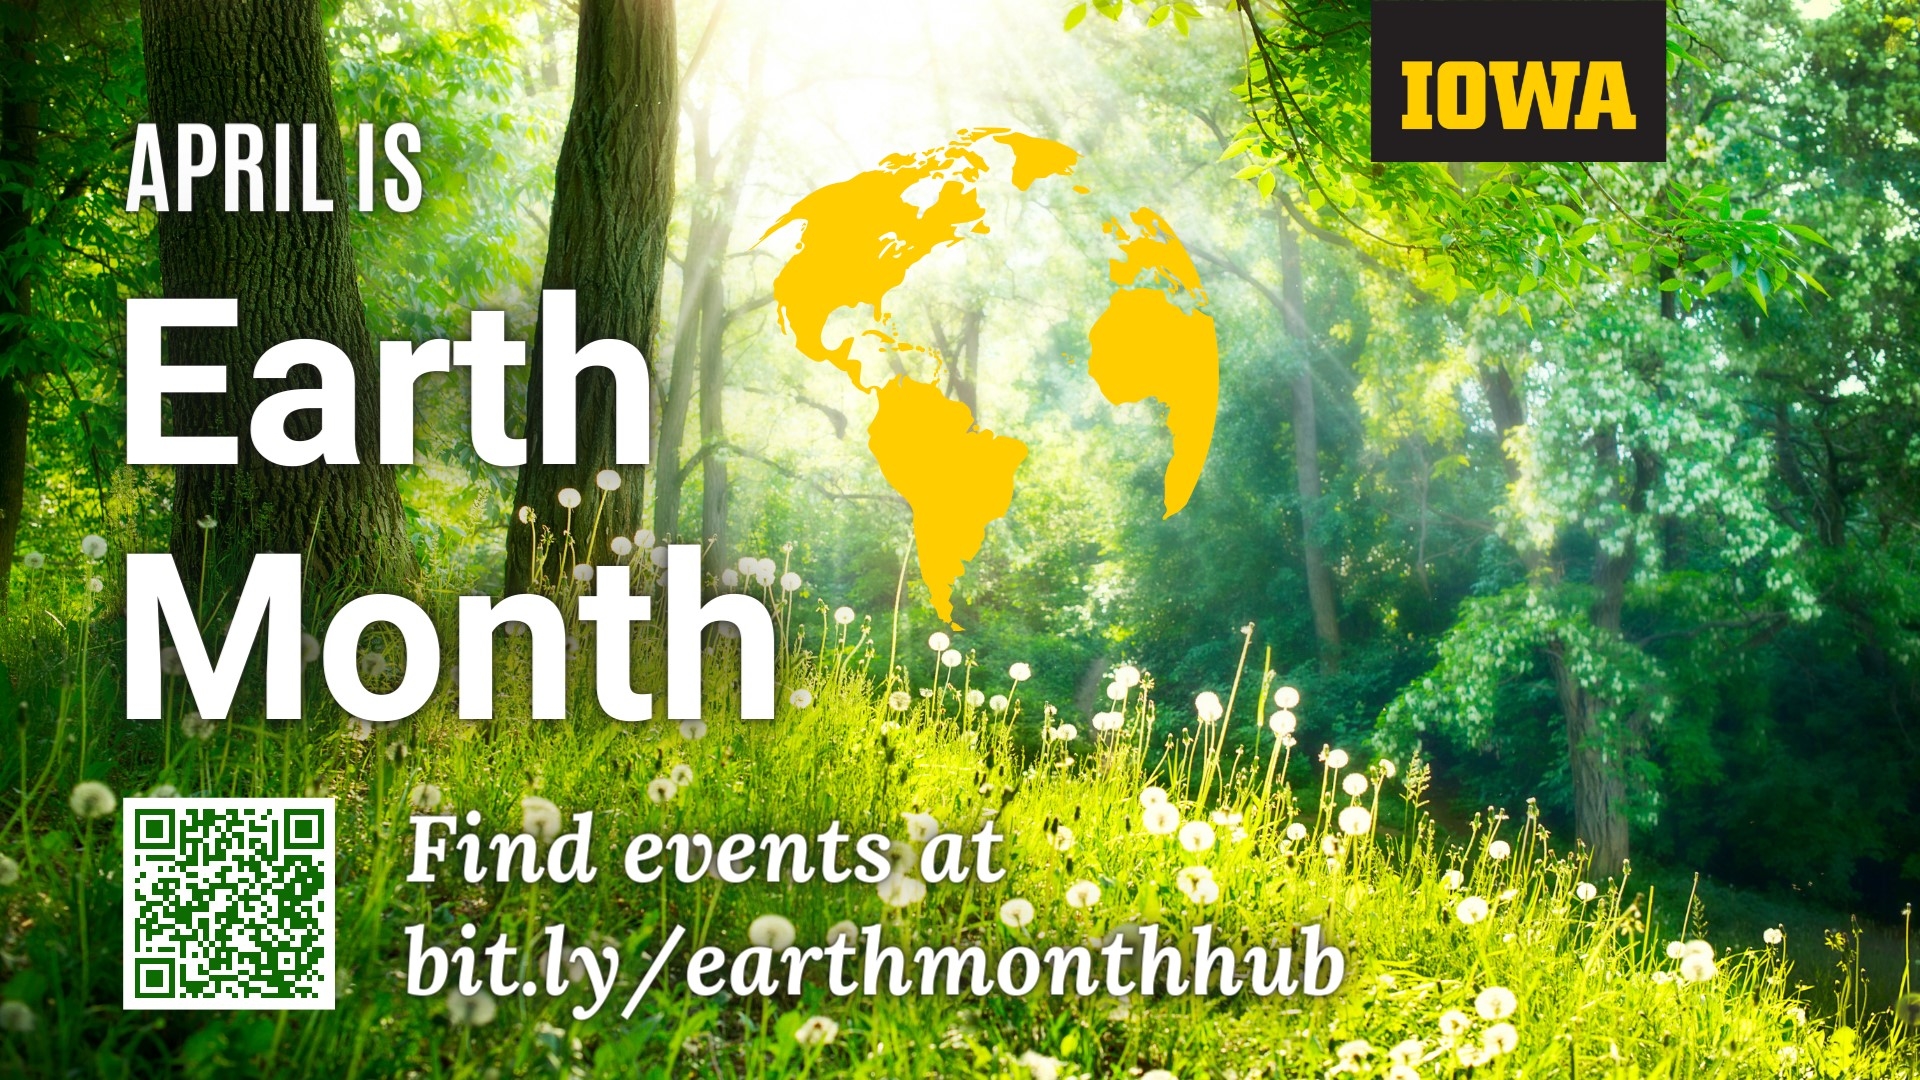 April is Earth Month. Find events at bit.ly/earthmonthhub